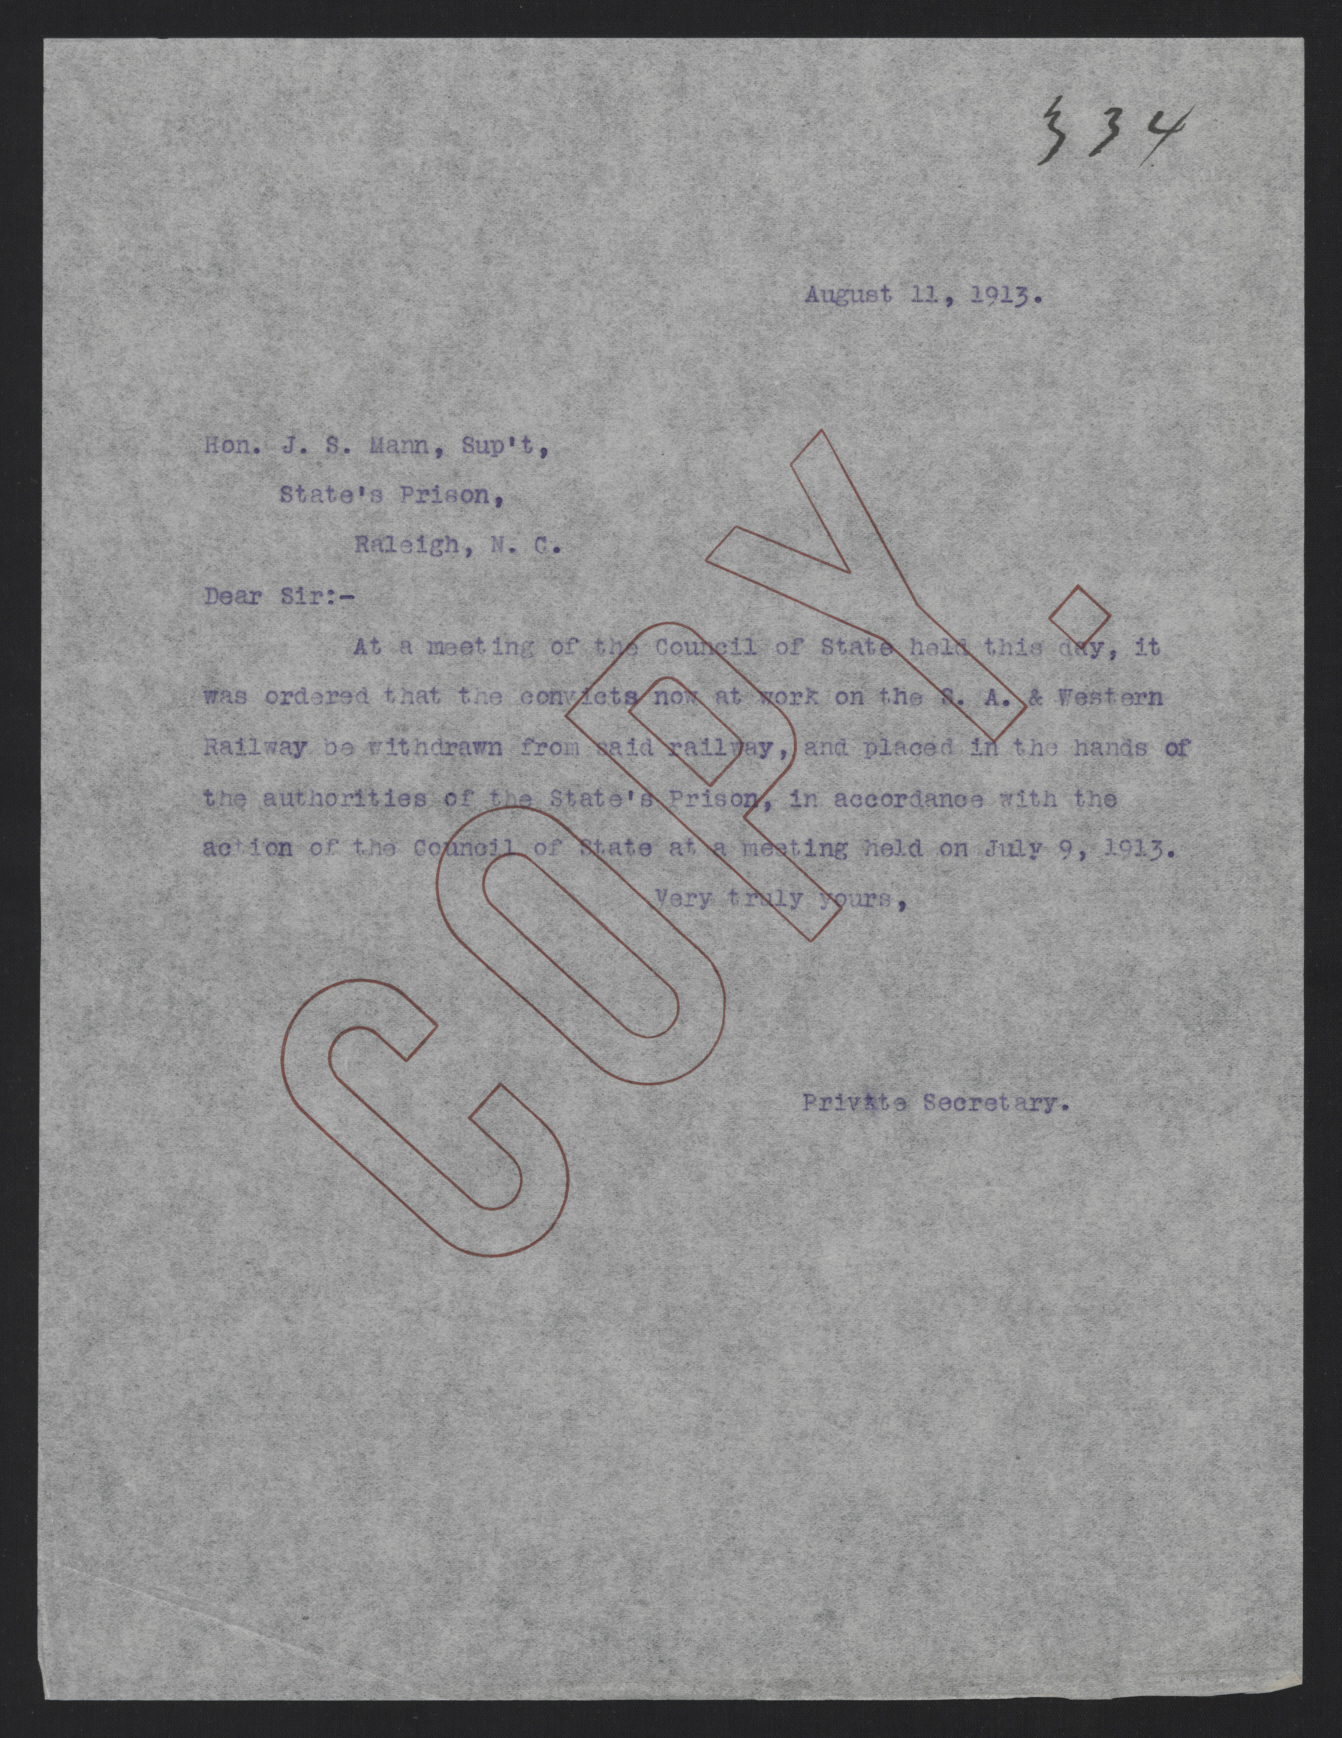 Letter from Kerr to Mann, August 11, 1913